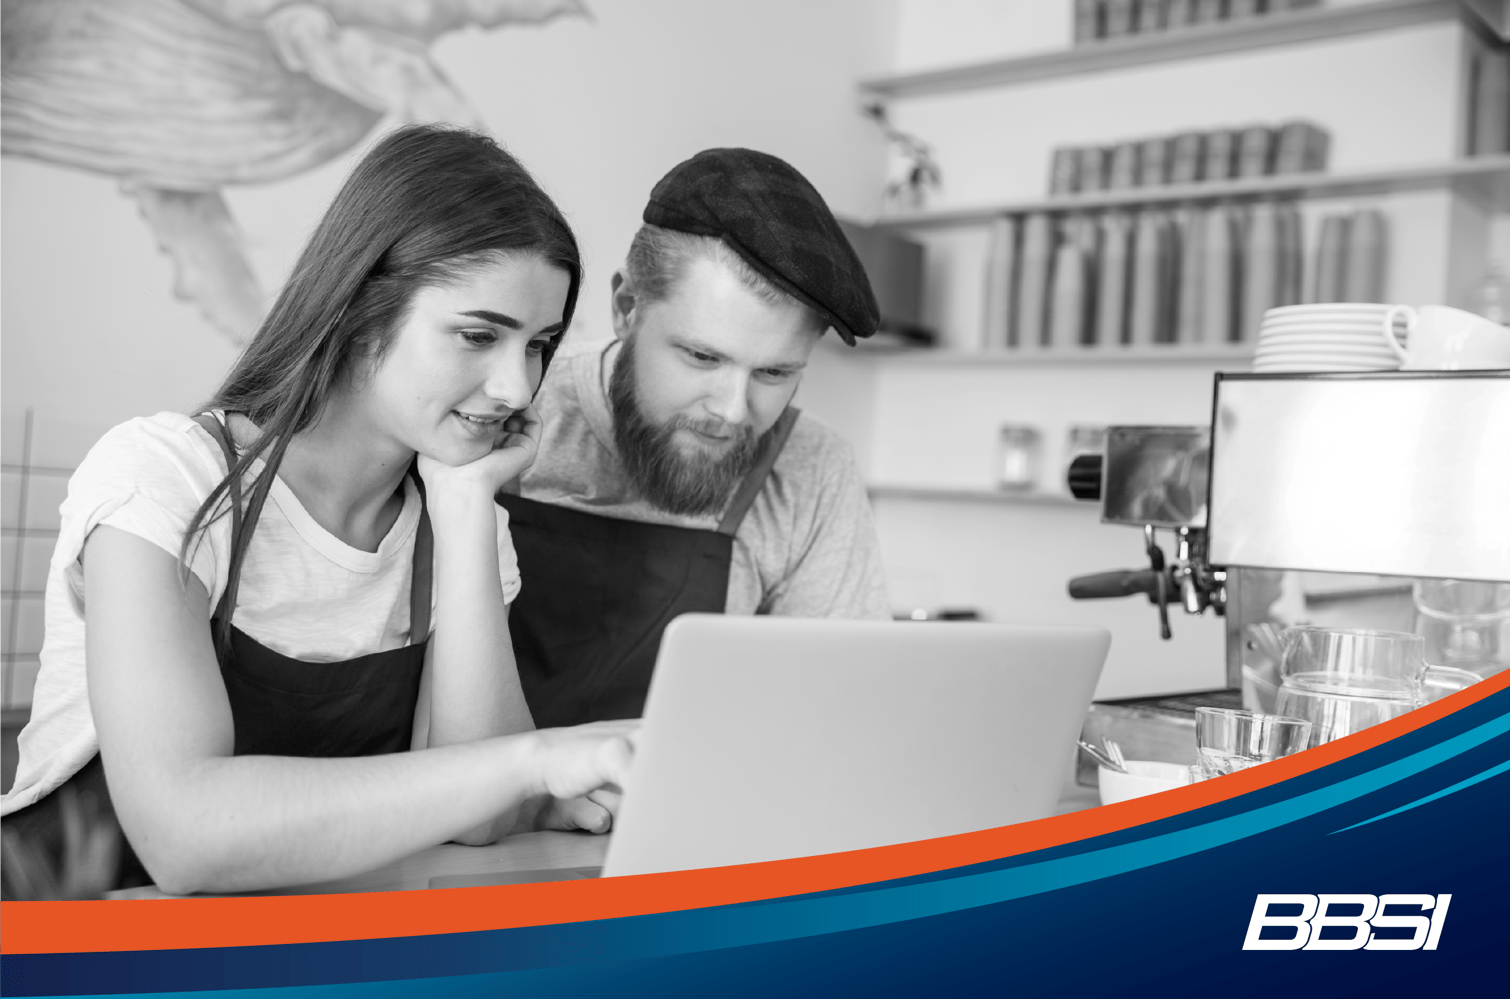 A man and woman are intently looking at a laptop, learning about the benefits of a good franchisee / franchise relationship